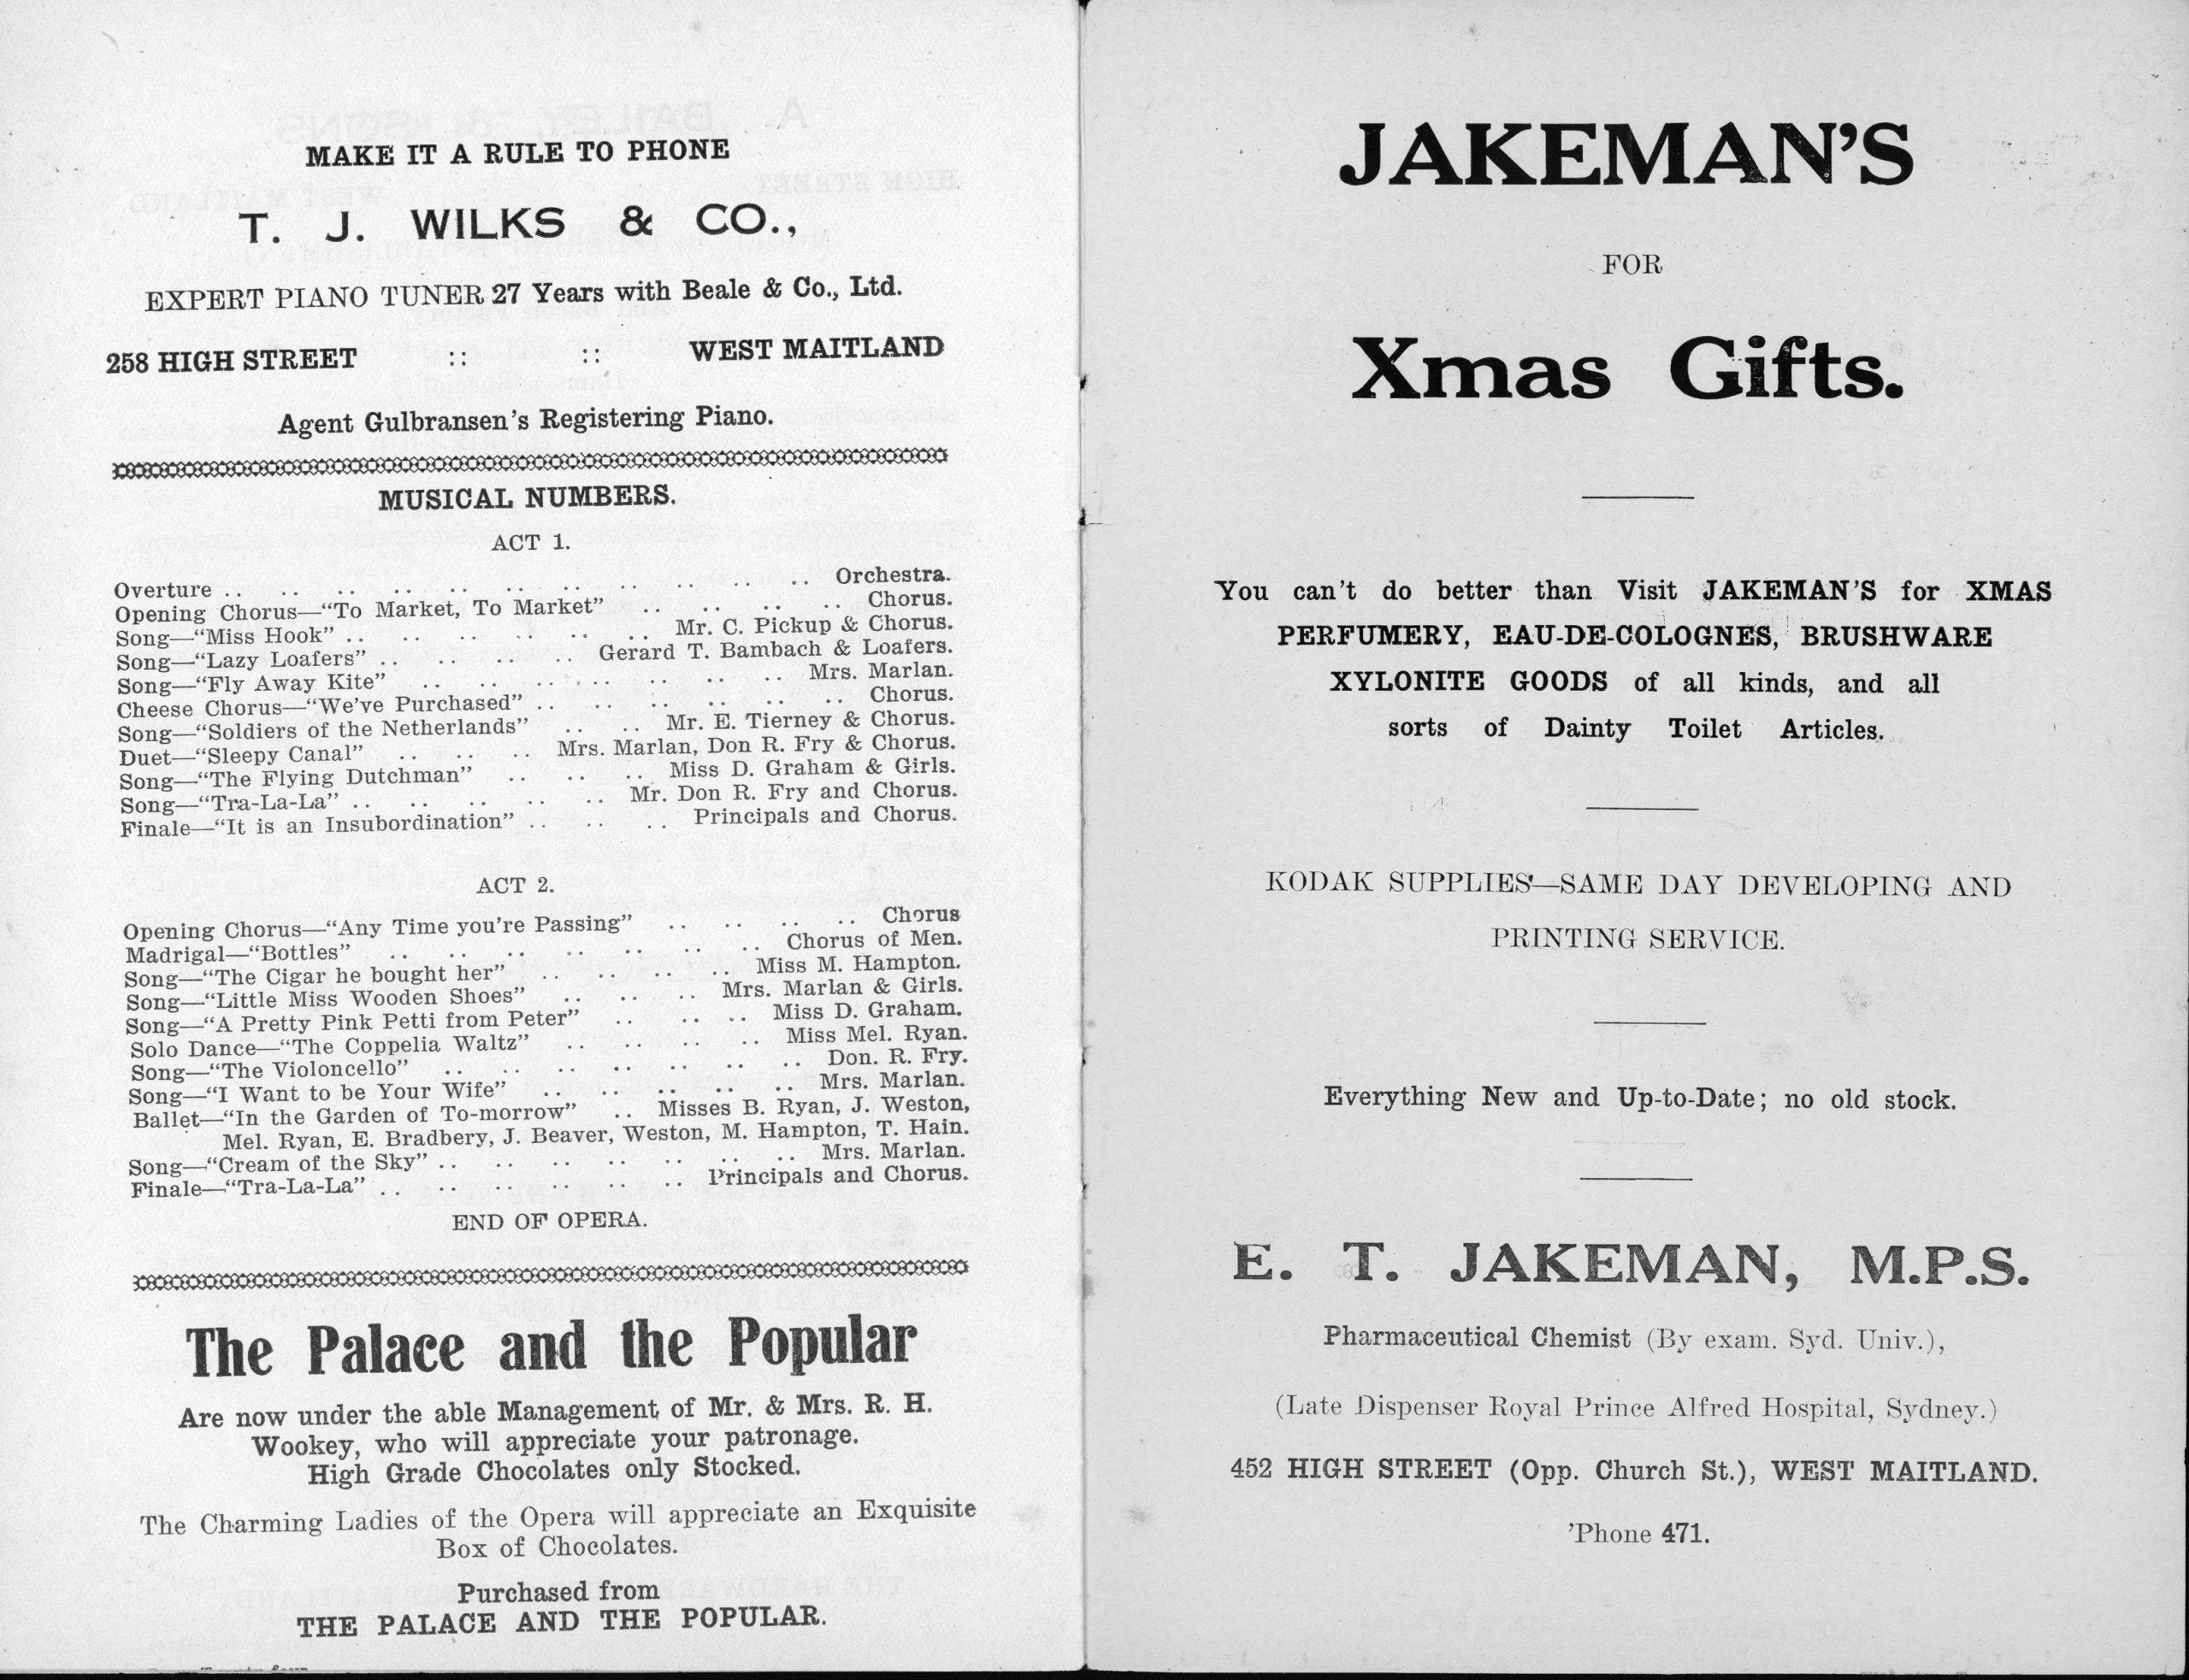 List of musical numbers amid text advertisements for a piano tuner, T.J. Wilks & Co, and a pharmacy, Jakeman's.